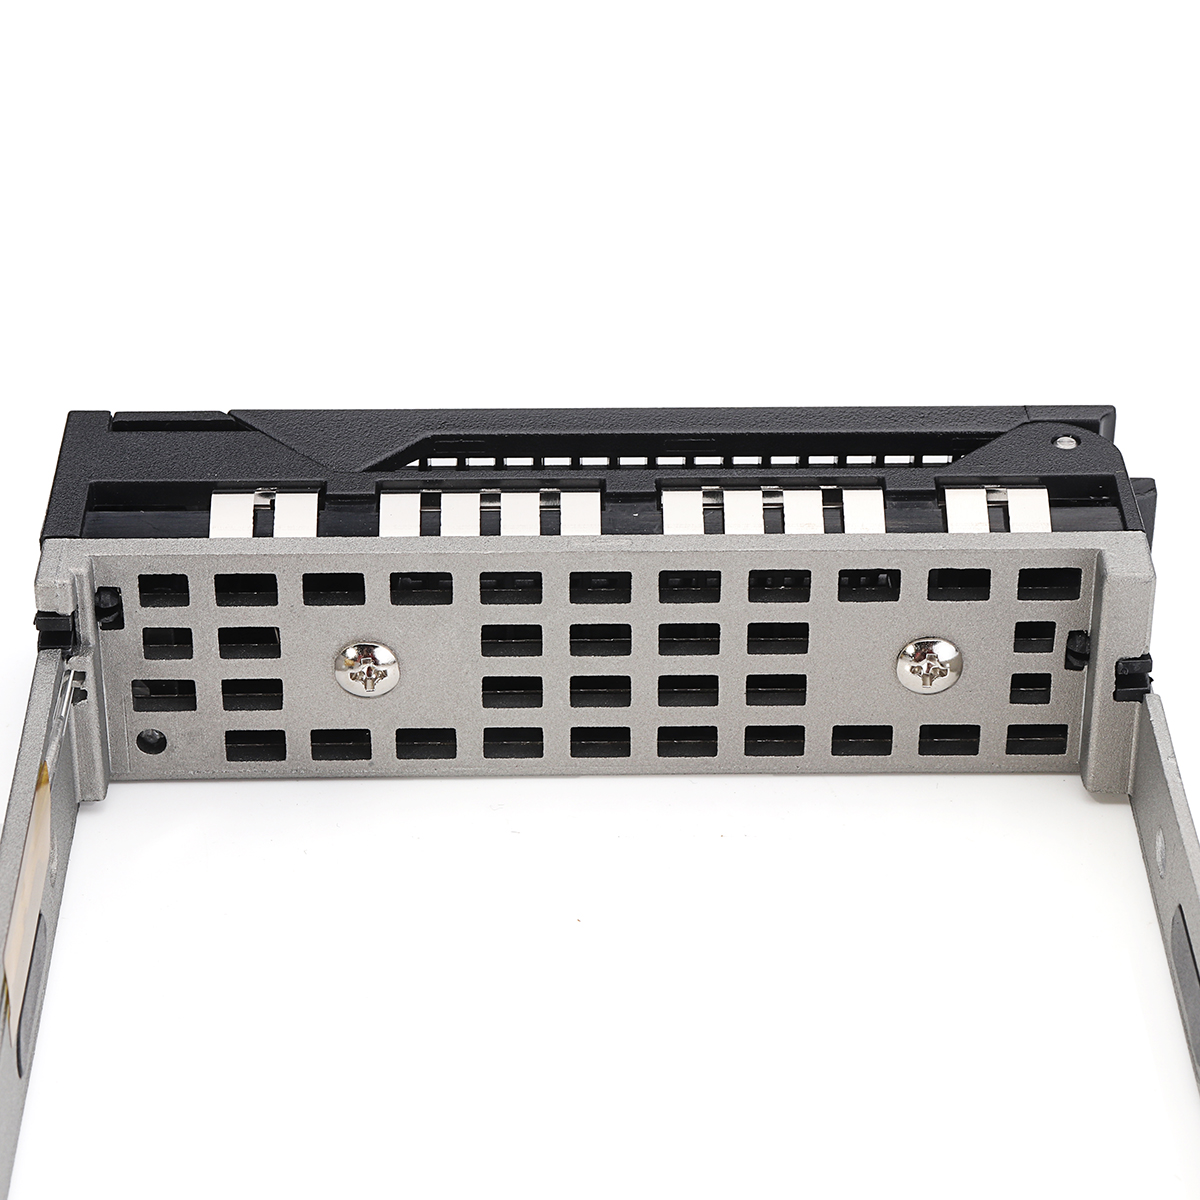 Find 3 5 Hard Drive Caddy Tray Converter For Lenovo RD330 Laptop for Sale on Gipsybee.com with cryptocurrencies